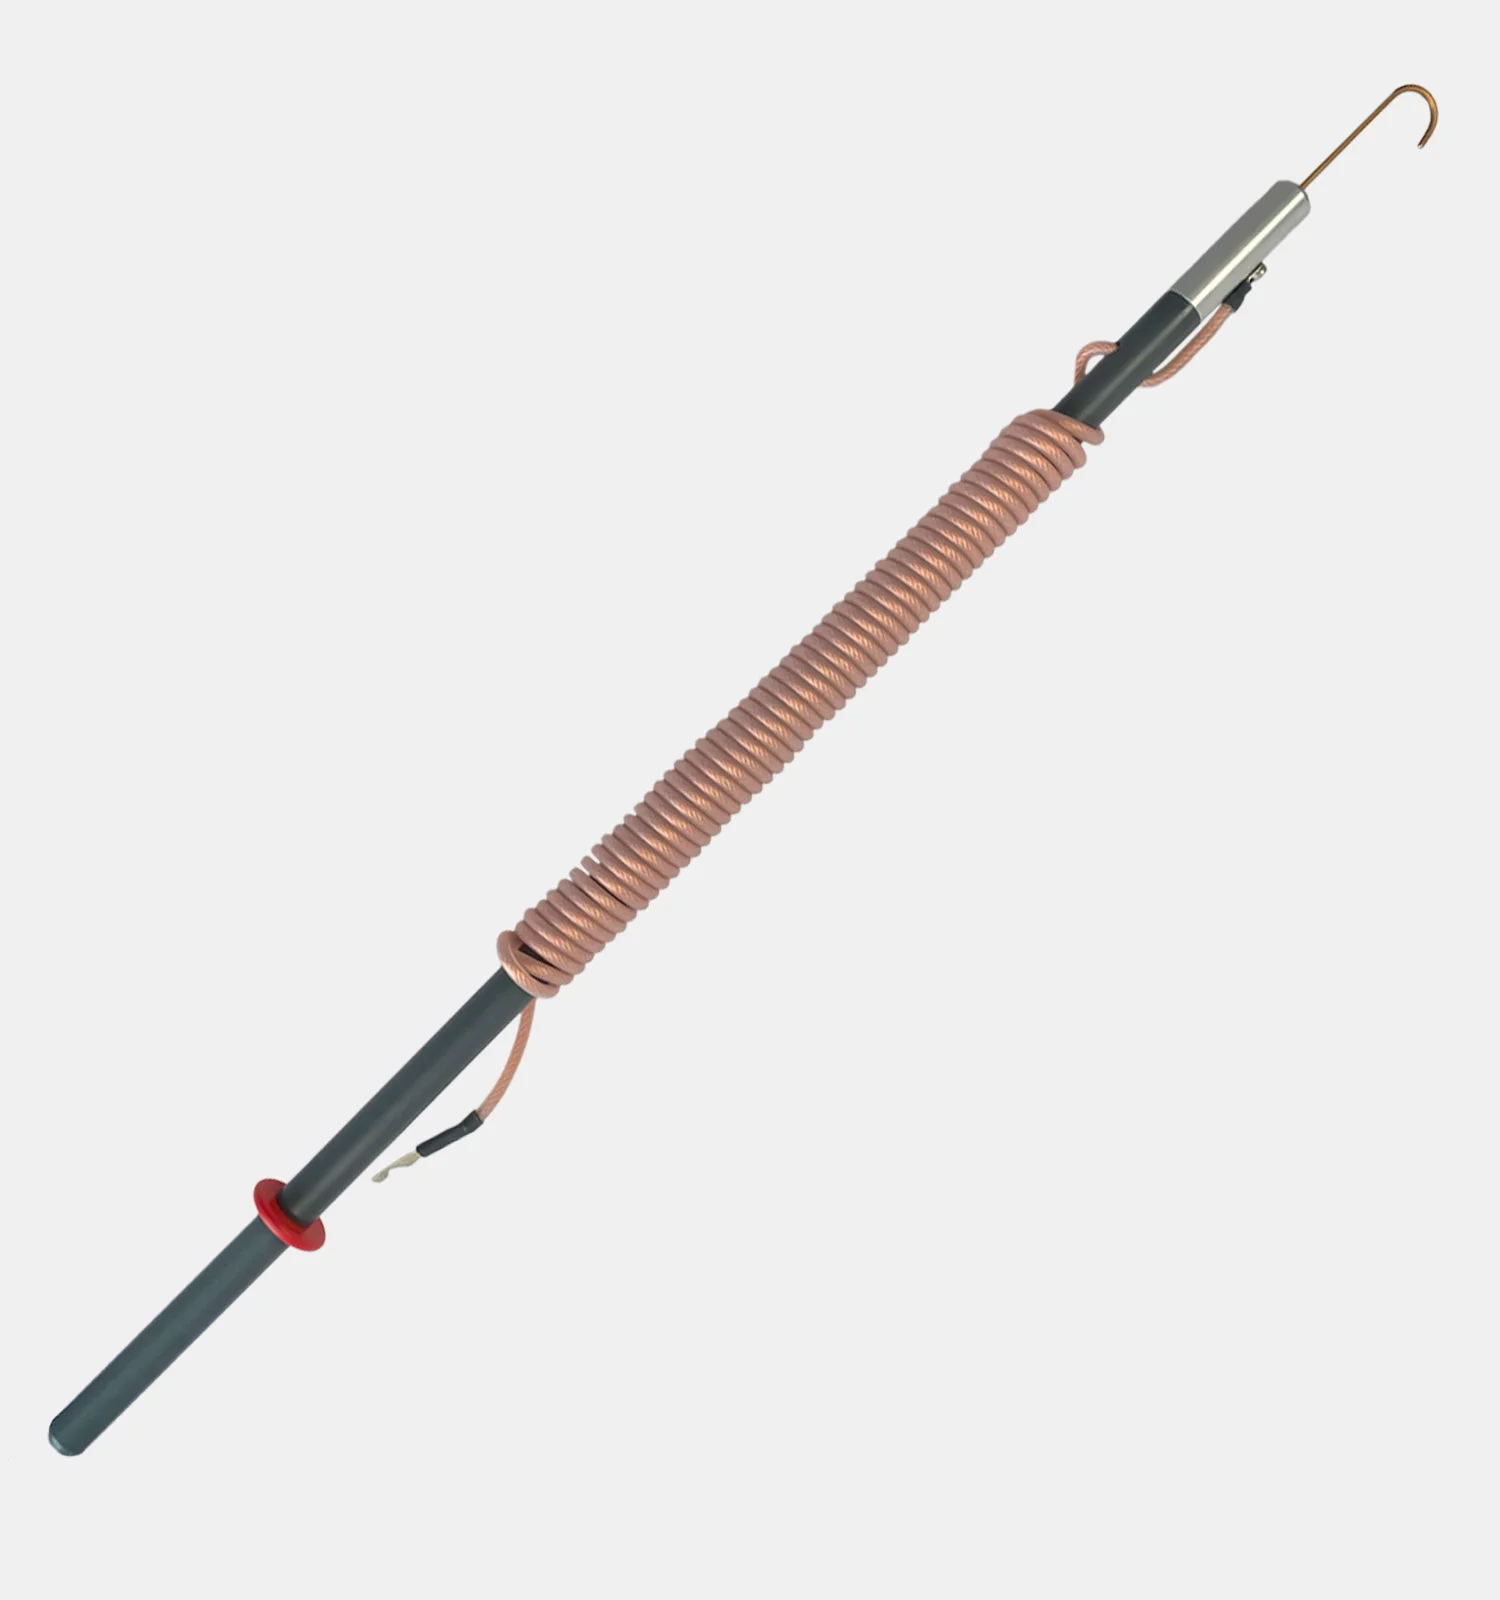 Suppliers of ES50 Earthing Stick UK